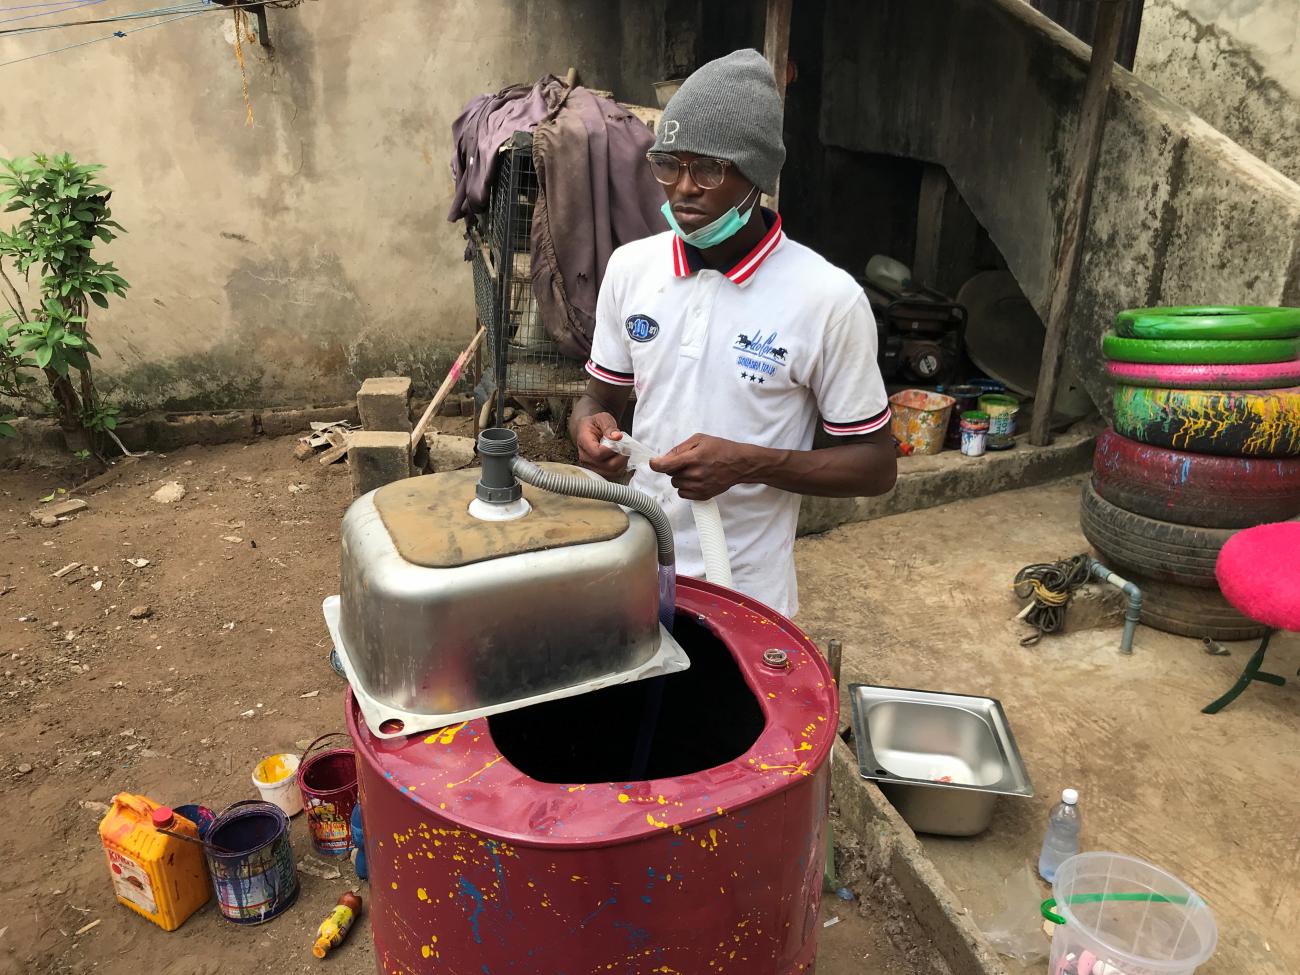 Bamigbose Adams, an artist using upcycled materials, makes a mobile hand-washing unit from a metal drum in his workshop in Igando, Lagos, Nigeria March 28, 2020